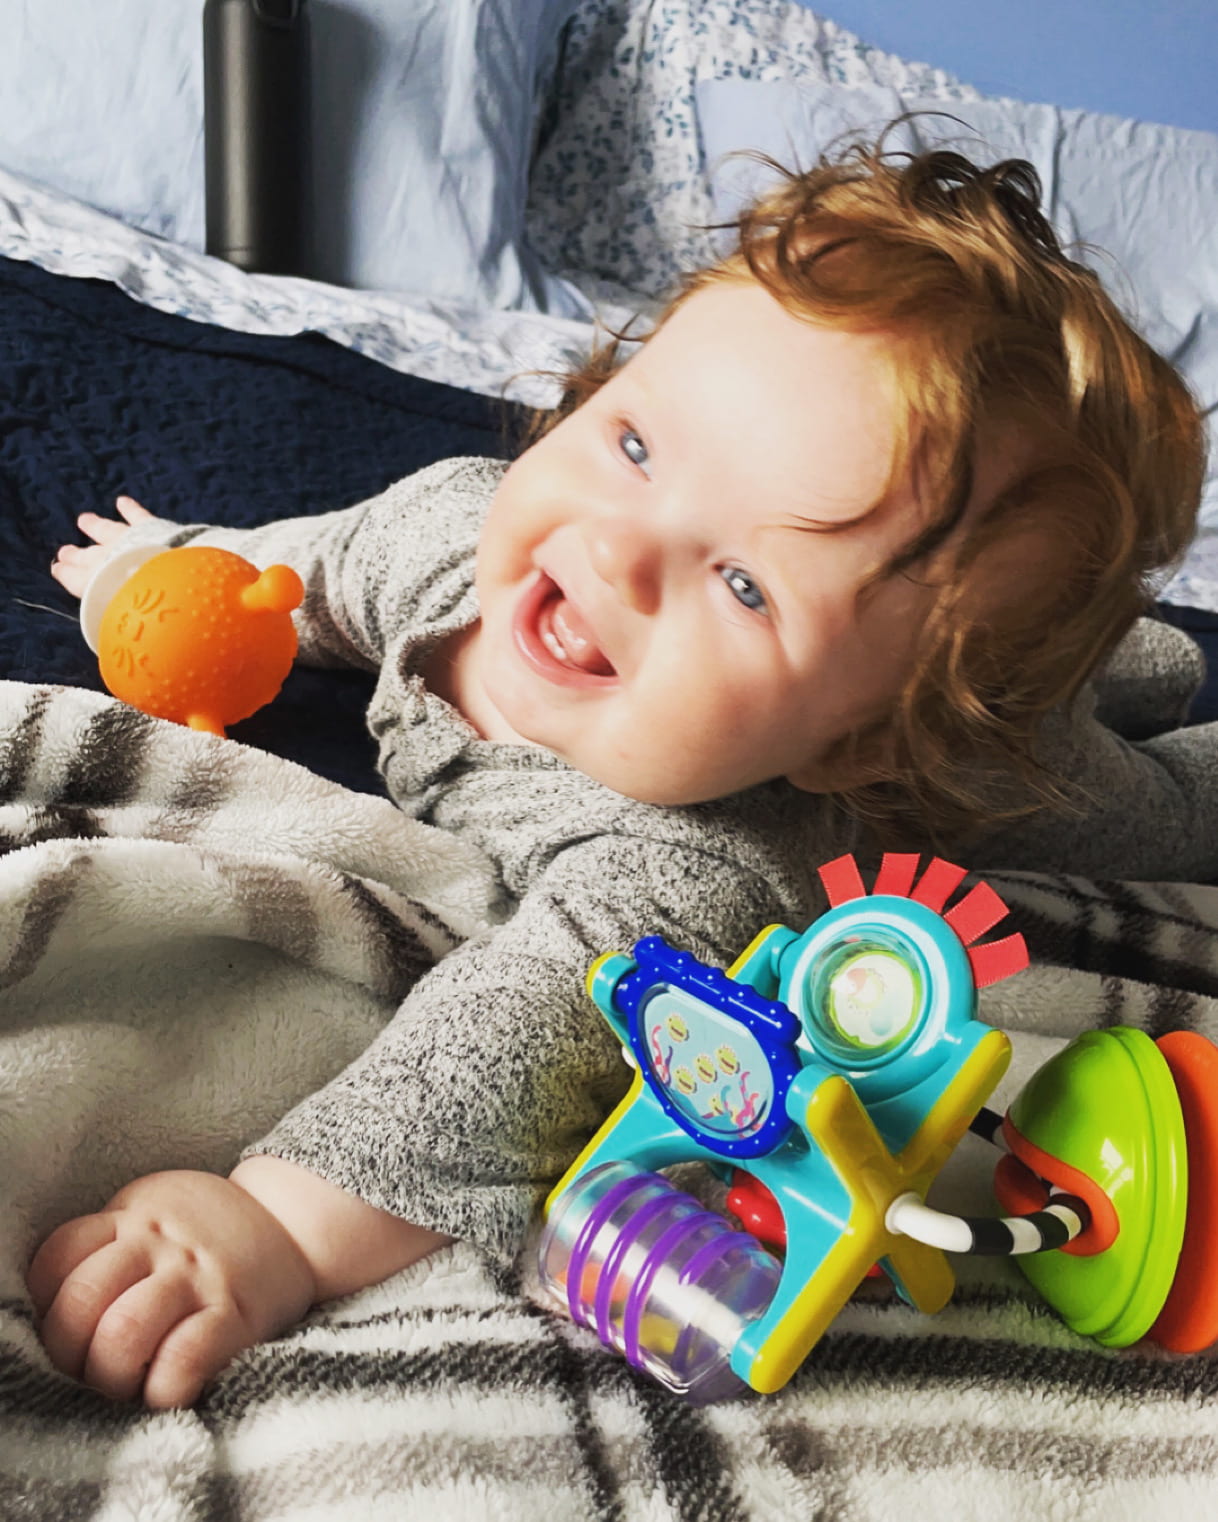 [Pictured is a 4-month-old baby laying on his stomach on a bed while smiling at the camera and playing with a rattle toy and a teething toy.]